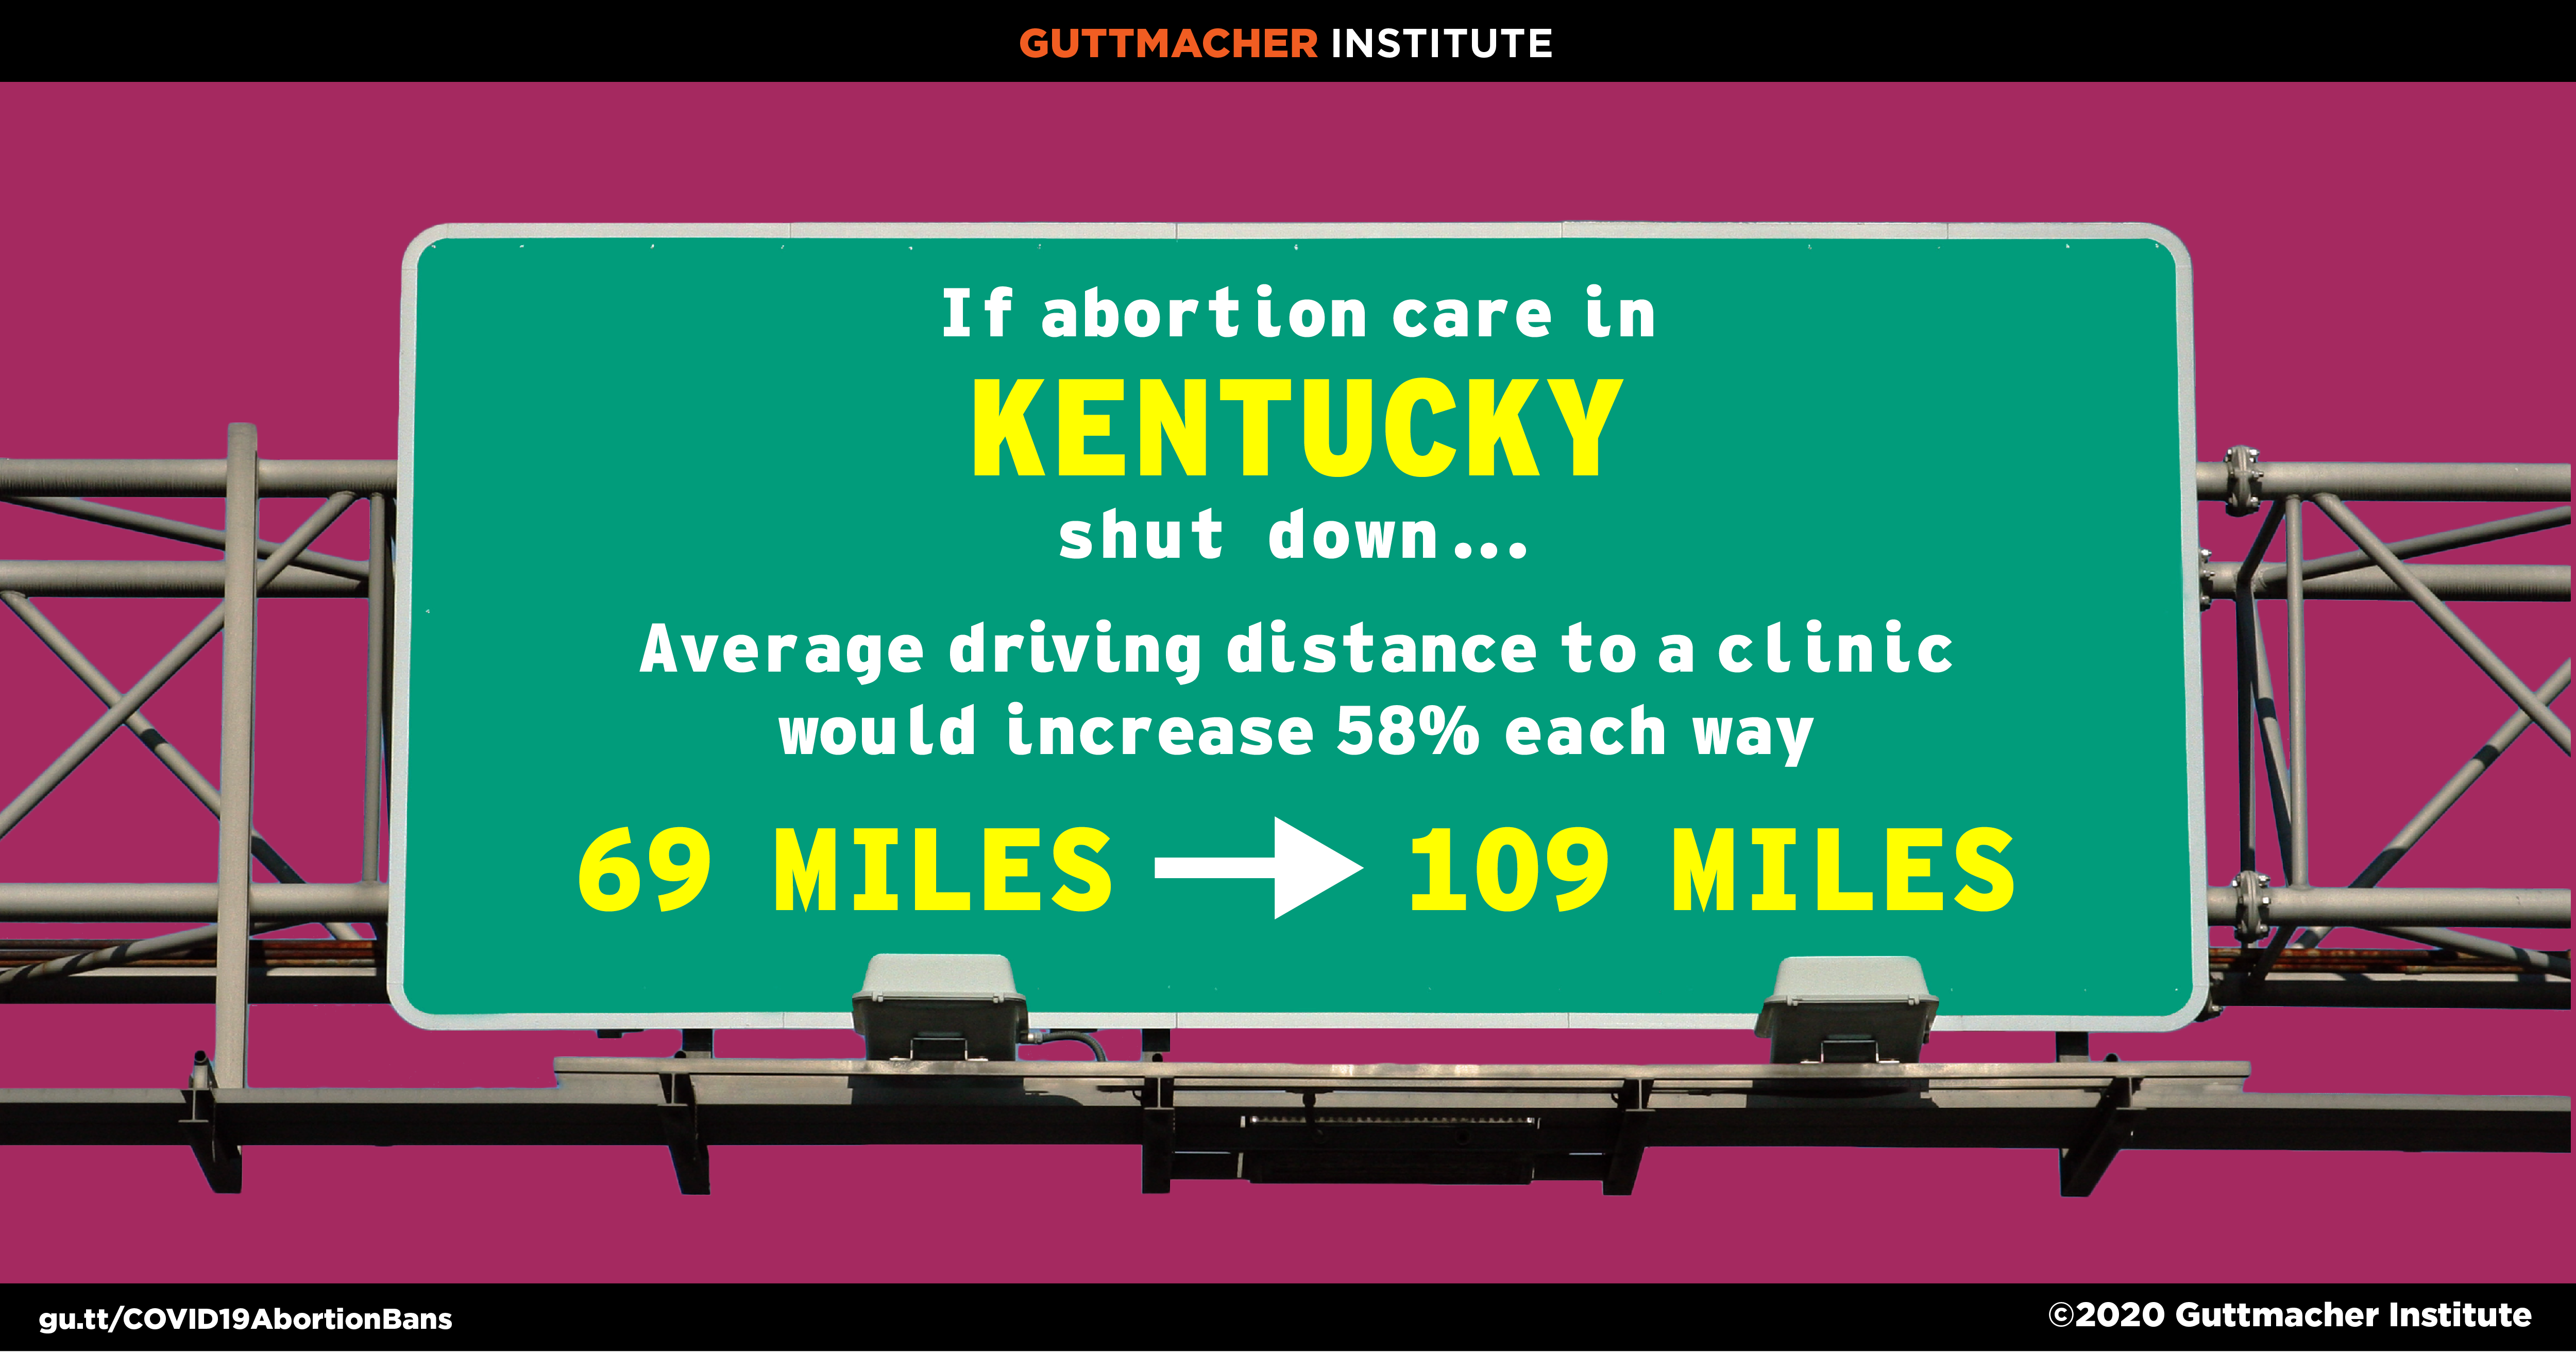 If abortion care in Kentucky shut down, the average driving distance to a clinic would increase 58% each way from 69 miles to 109 miles